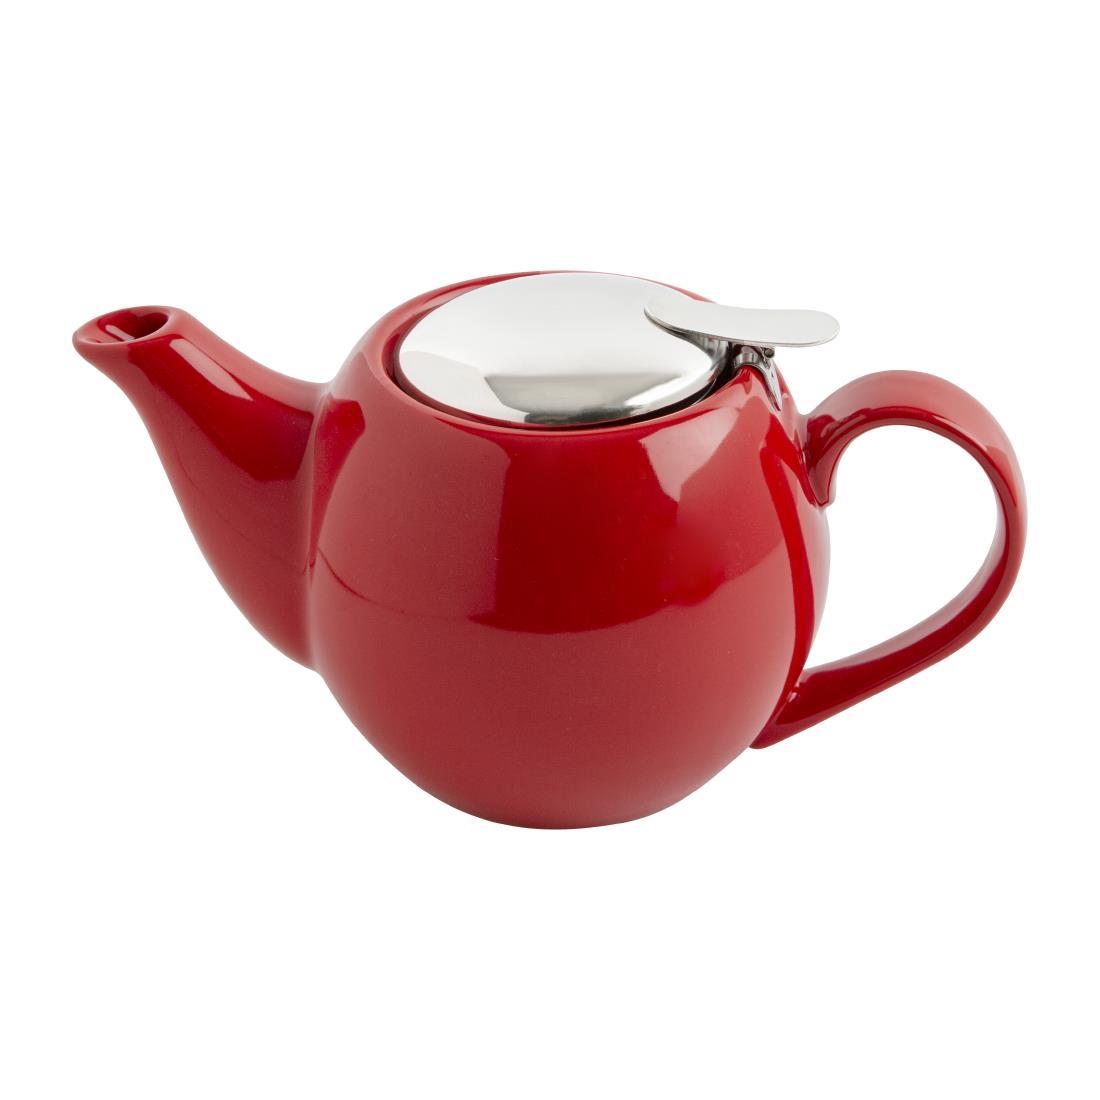 Olympia Cafe Teapot 510ml Red - GM594  - 2